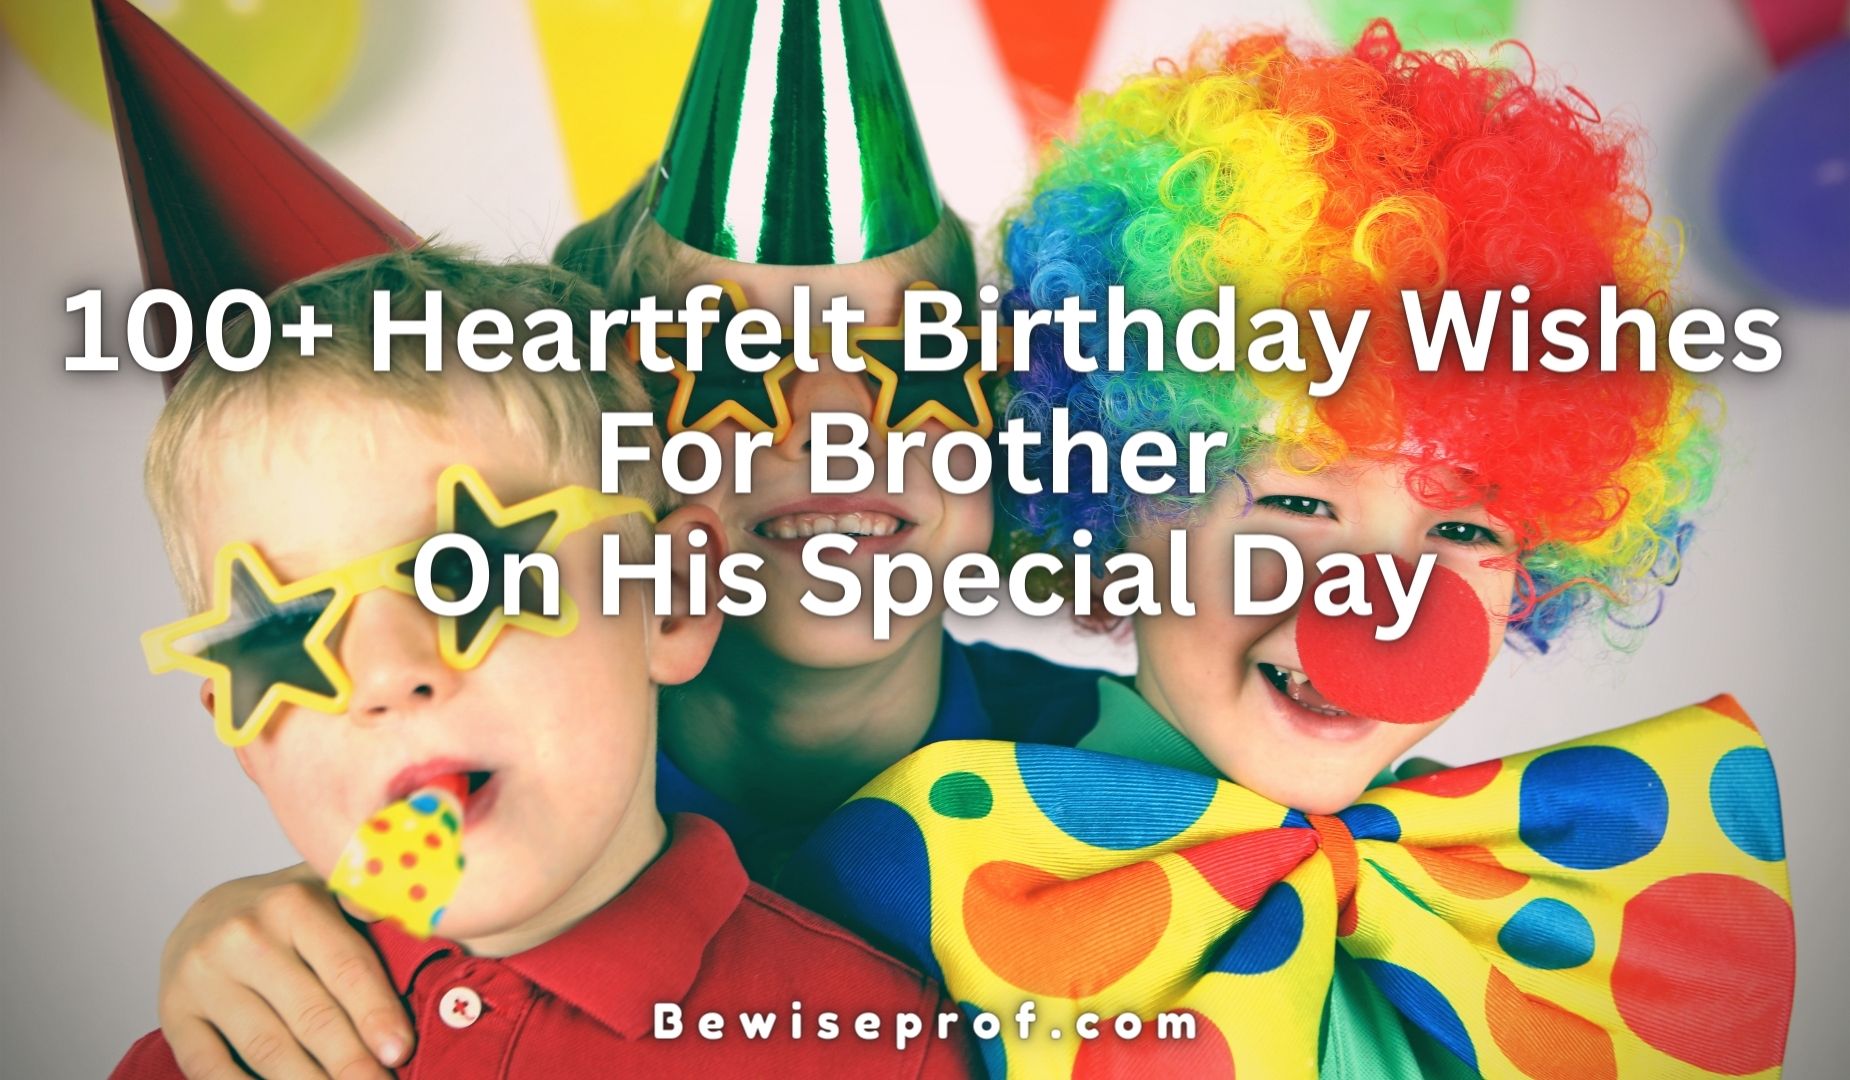 100+ Heartfelt Birthday Wishes For Brother On His Special Day